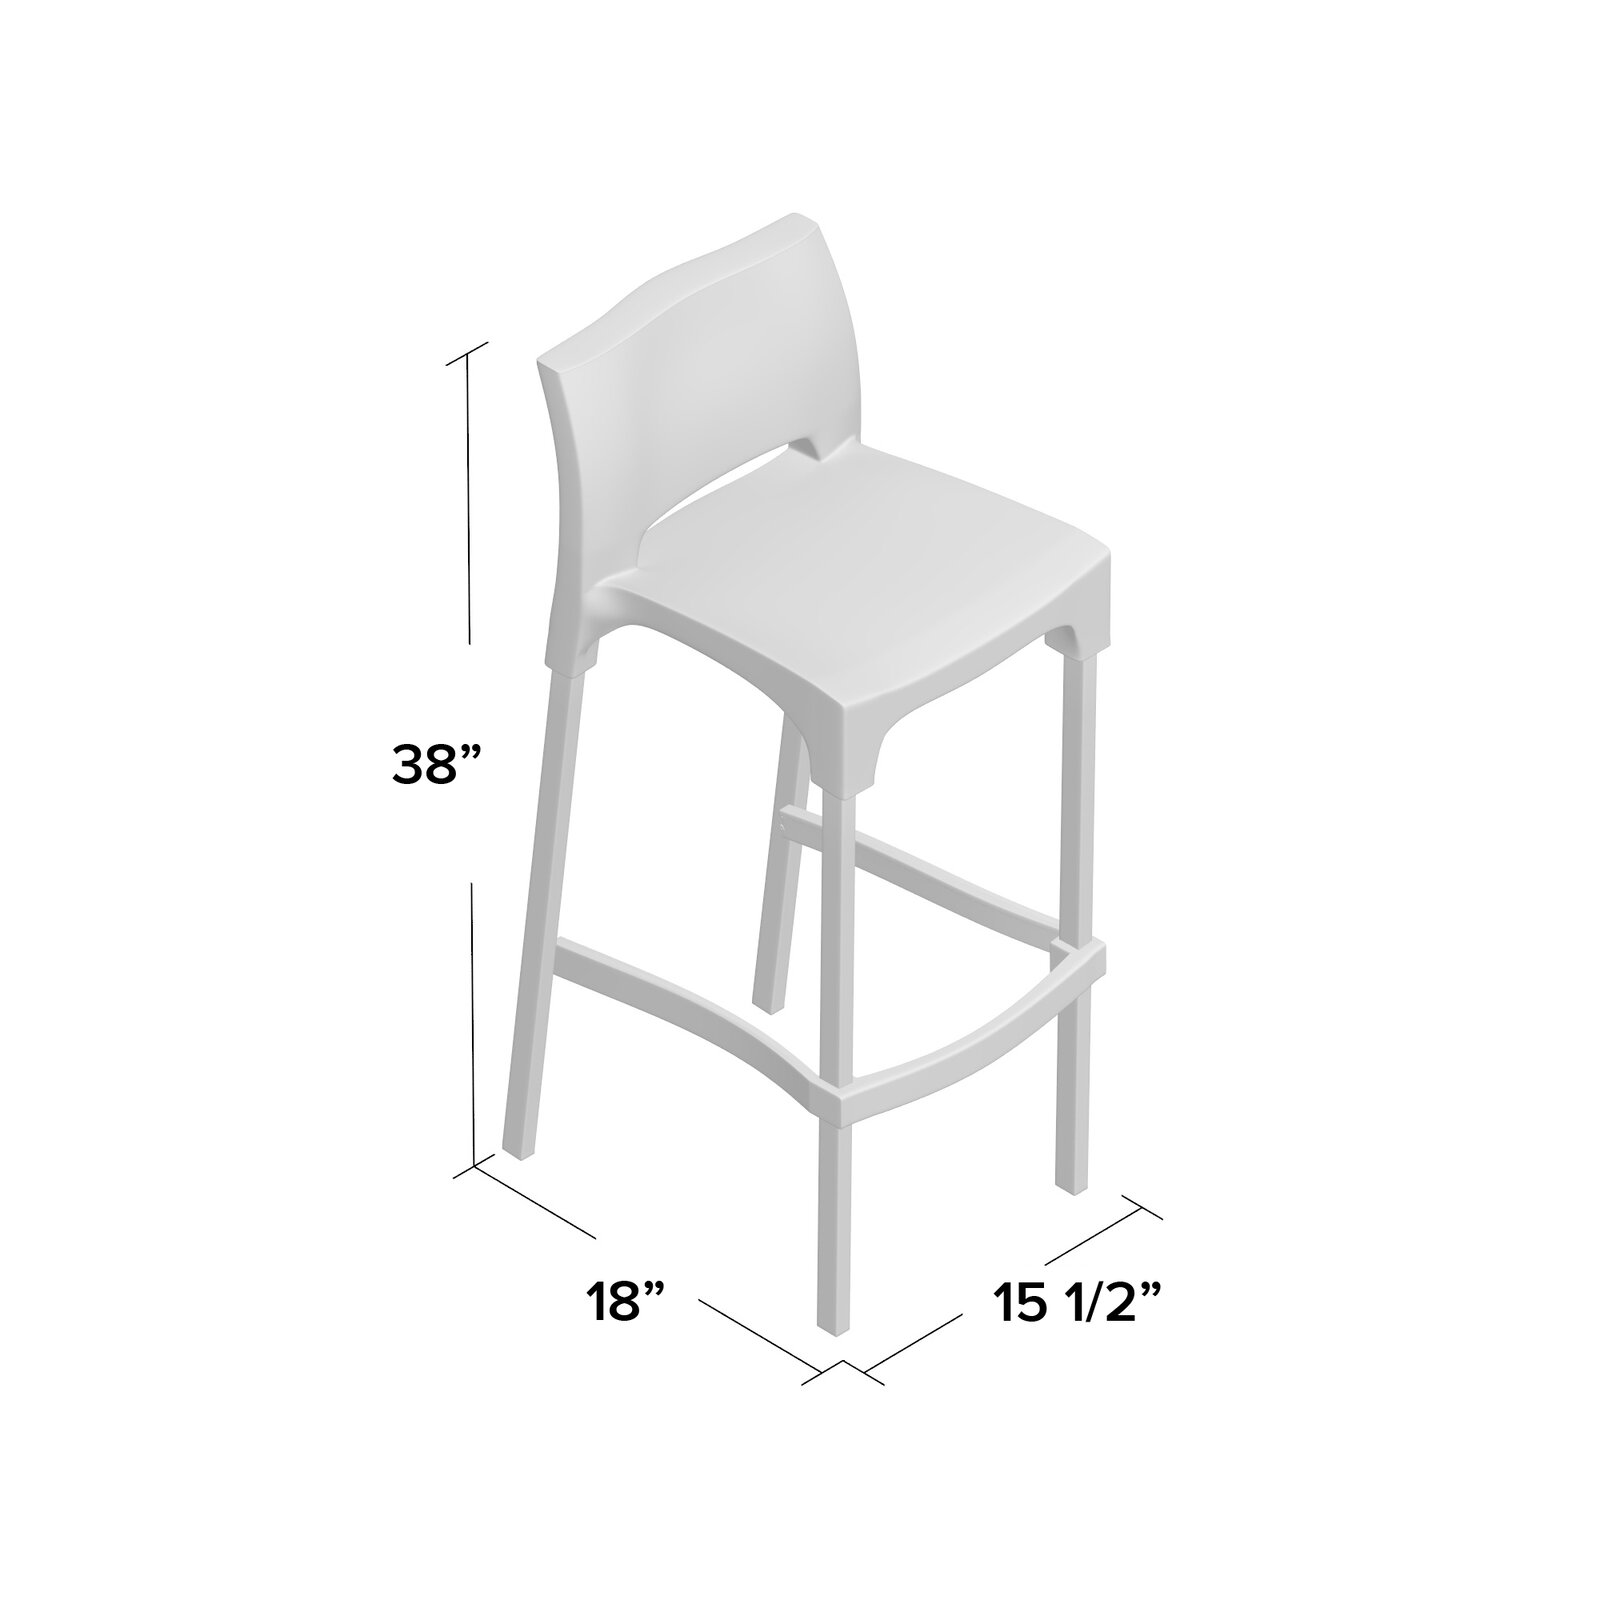 Goin Outdoor 29.5" Patio Bar Stool, Number of Bar Stools Included: 2, ISO 14001 Certified: Yes - image 2 of 2